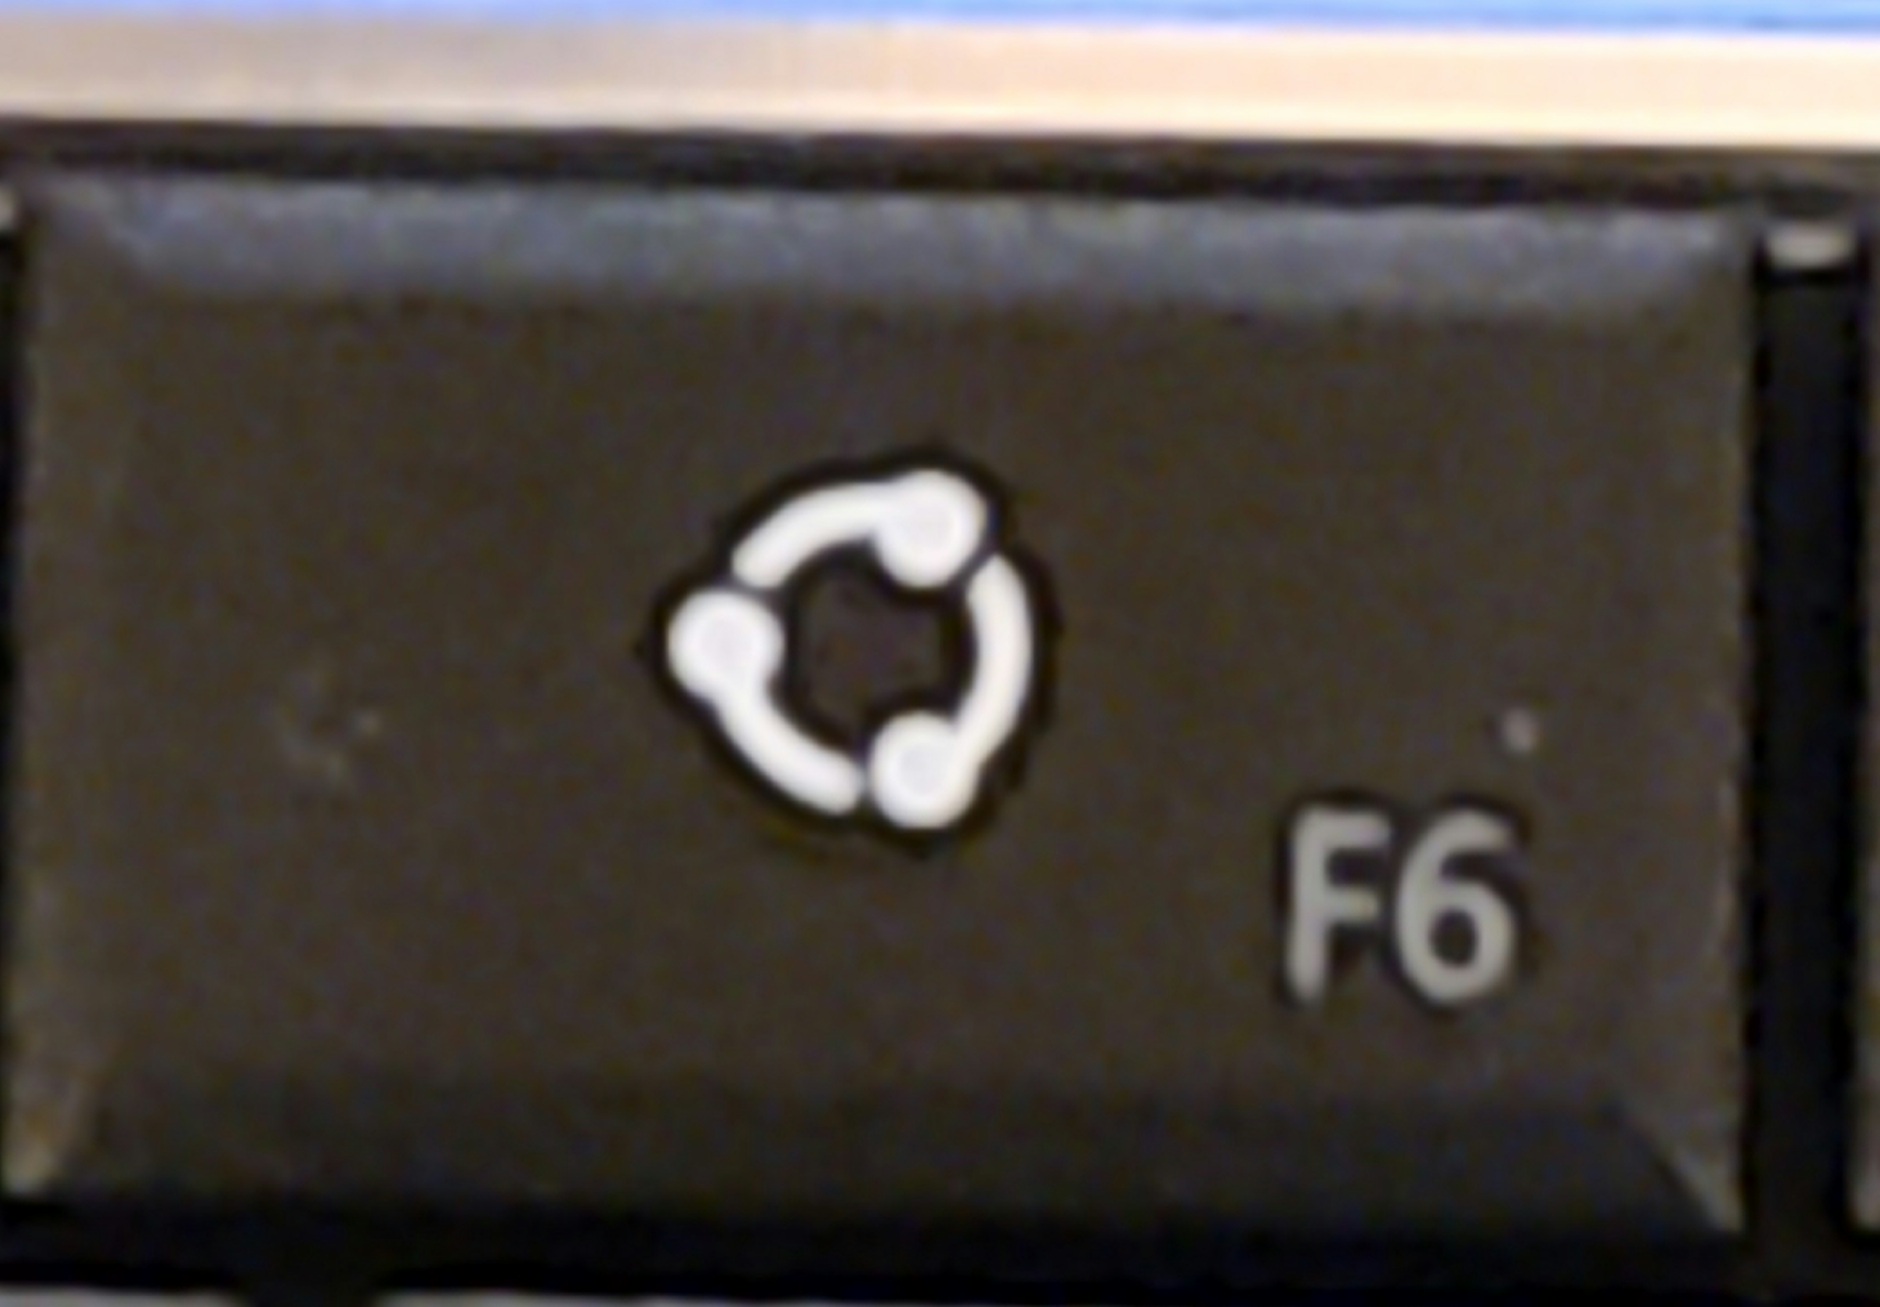 What does this Special function key do? Microsoft brand keyboards 003d7707-e9eb-4302-8c4a-be8460c7d838?upload=true.jpg